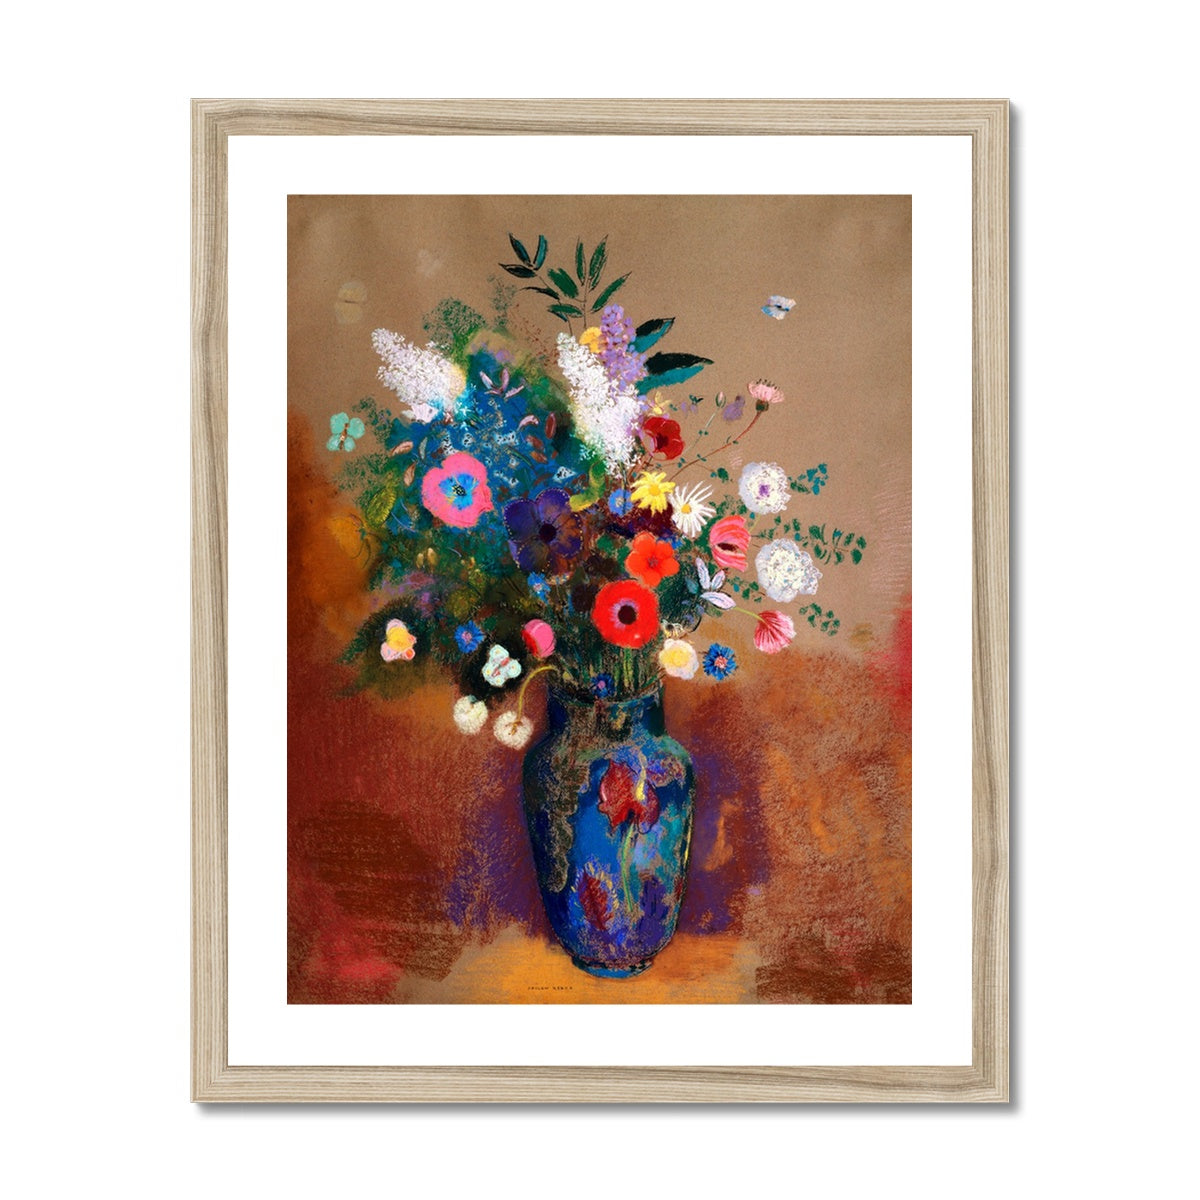 Redon - Bouquet of Flowers gerahmtes Poster - Atopurinto